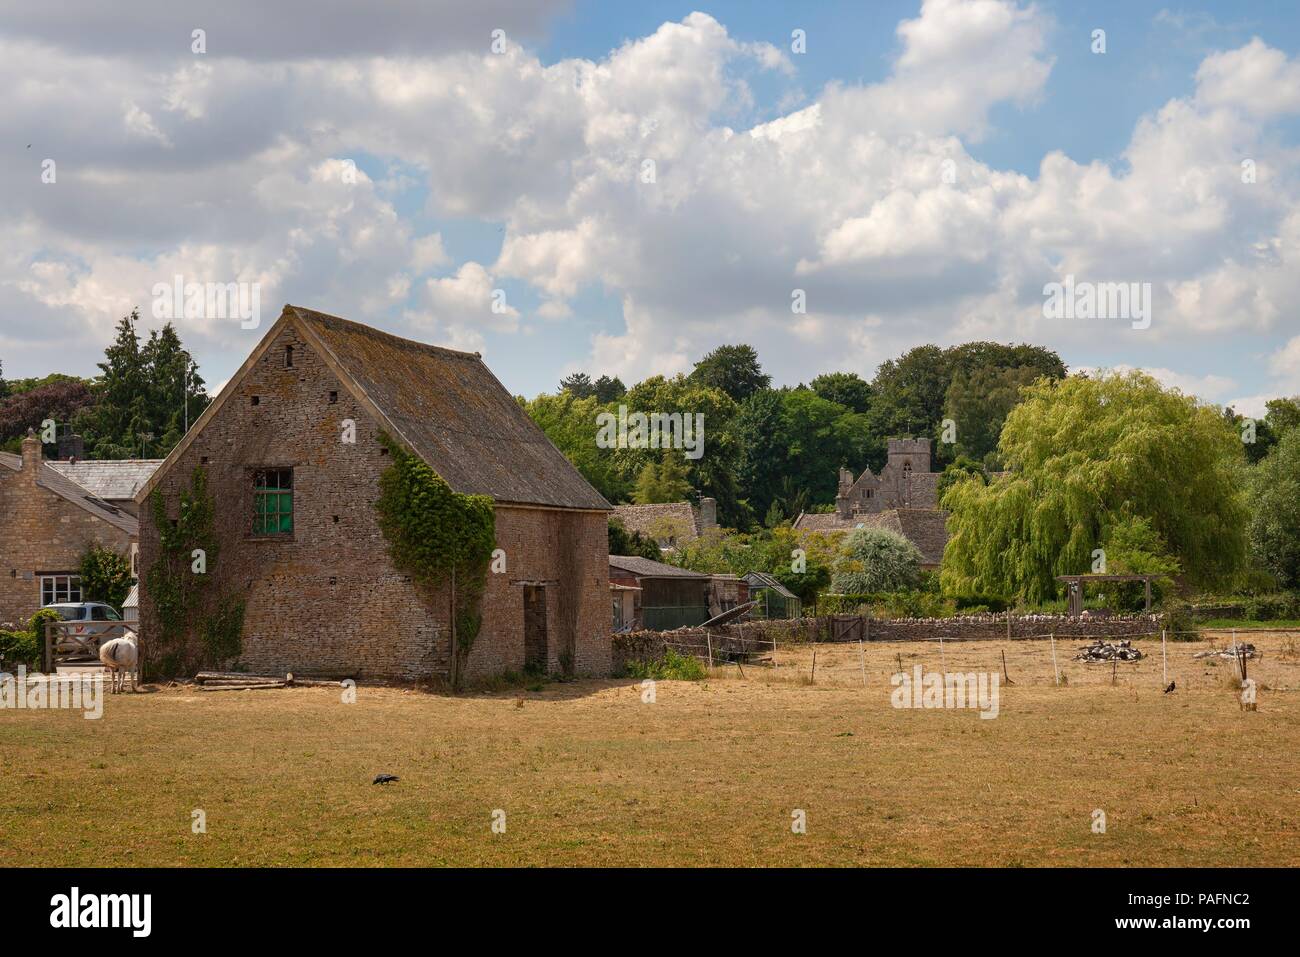 Asthall village, Cotswolds, Oxfordshire, England Stock Photo